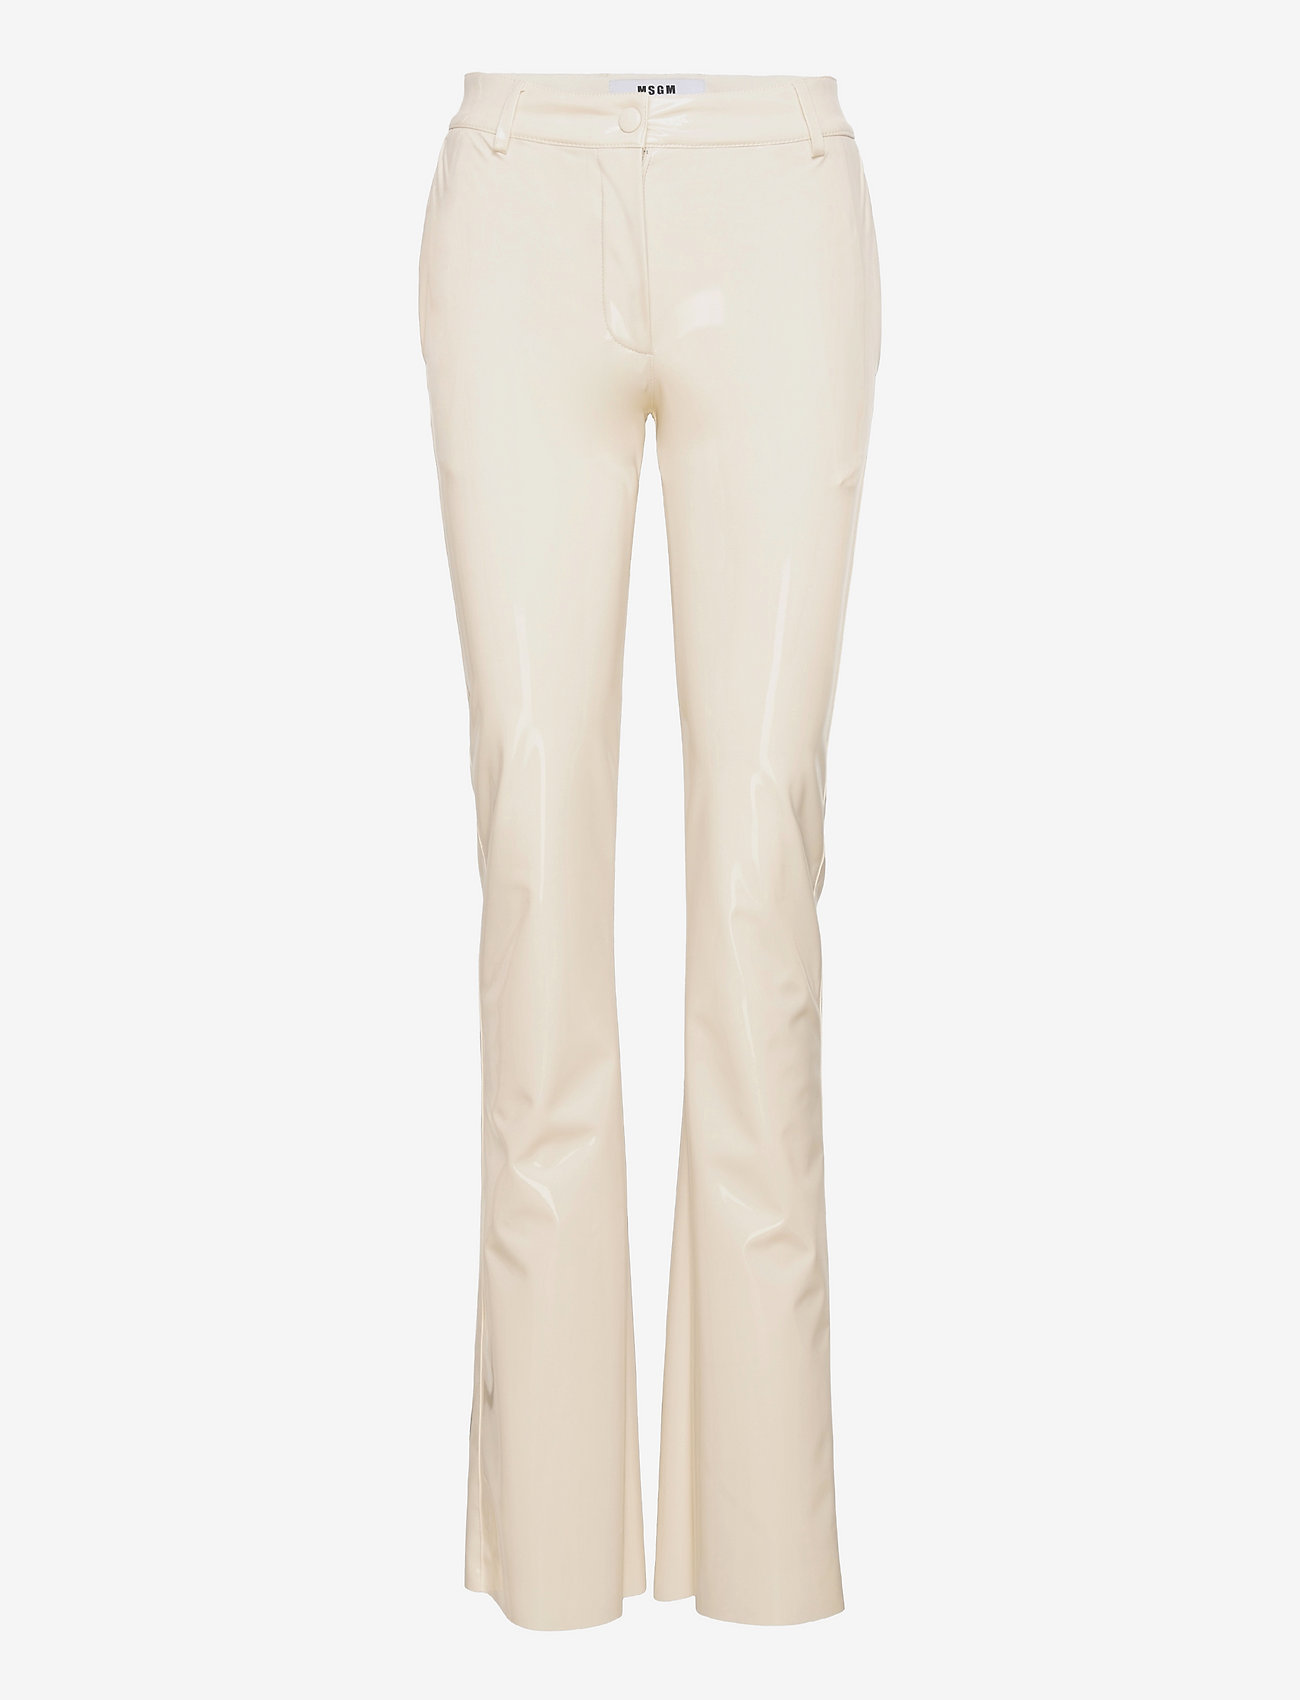 MSGM - PATENT FAUX LEATHER PANTS - festmode zu outlet-preisen - cream - 0